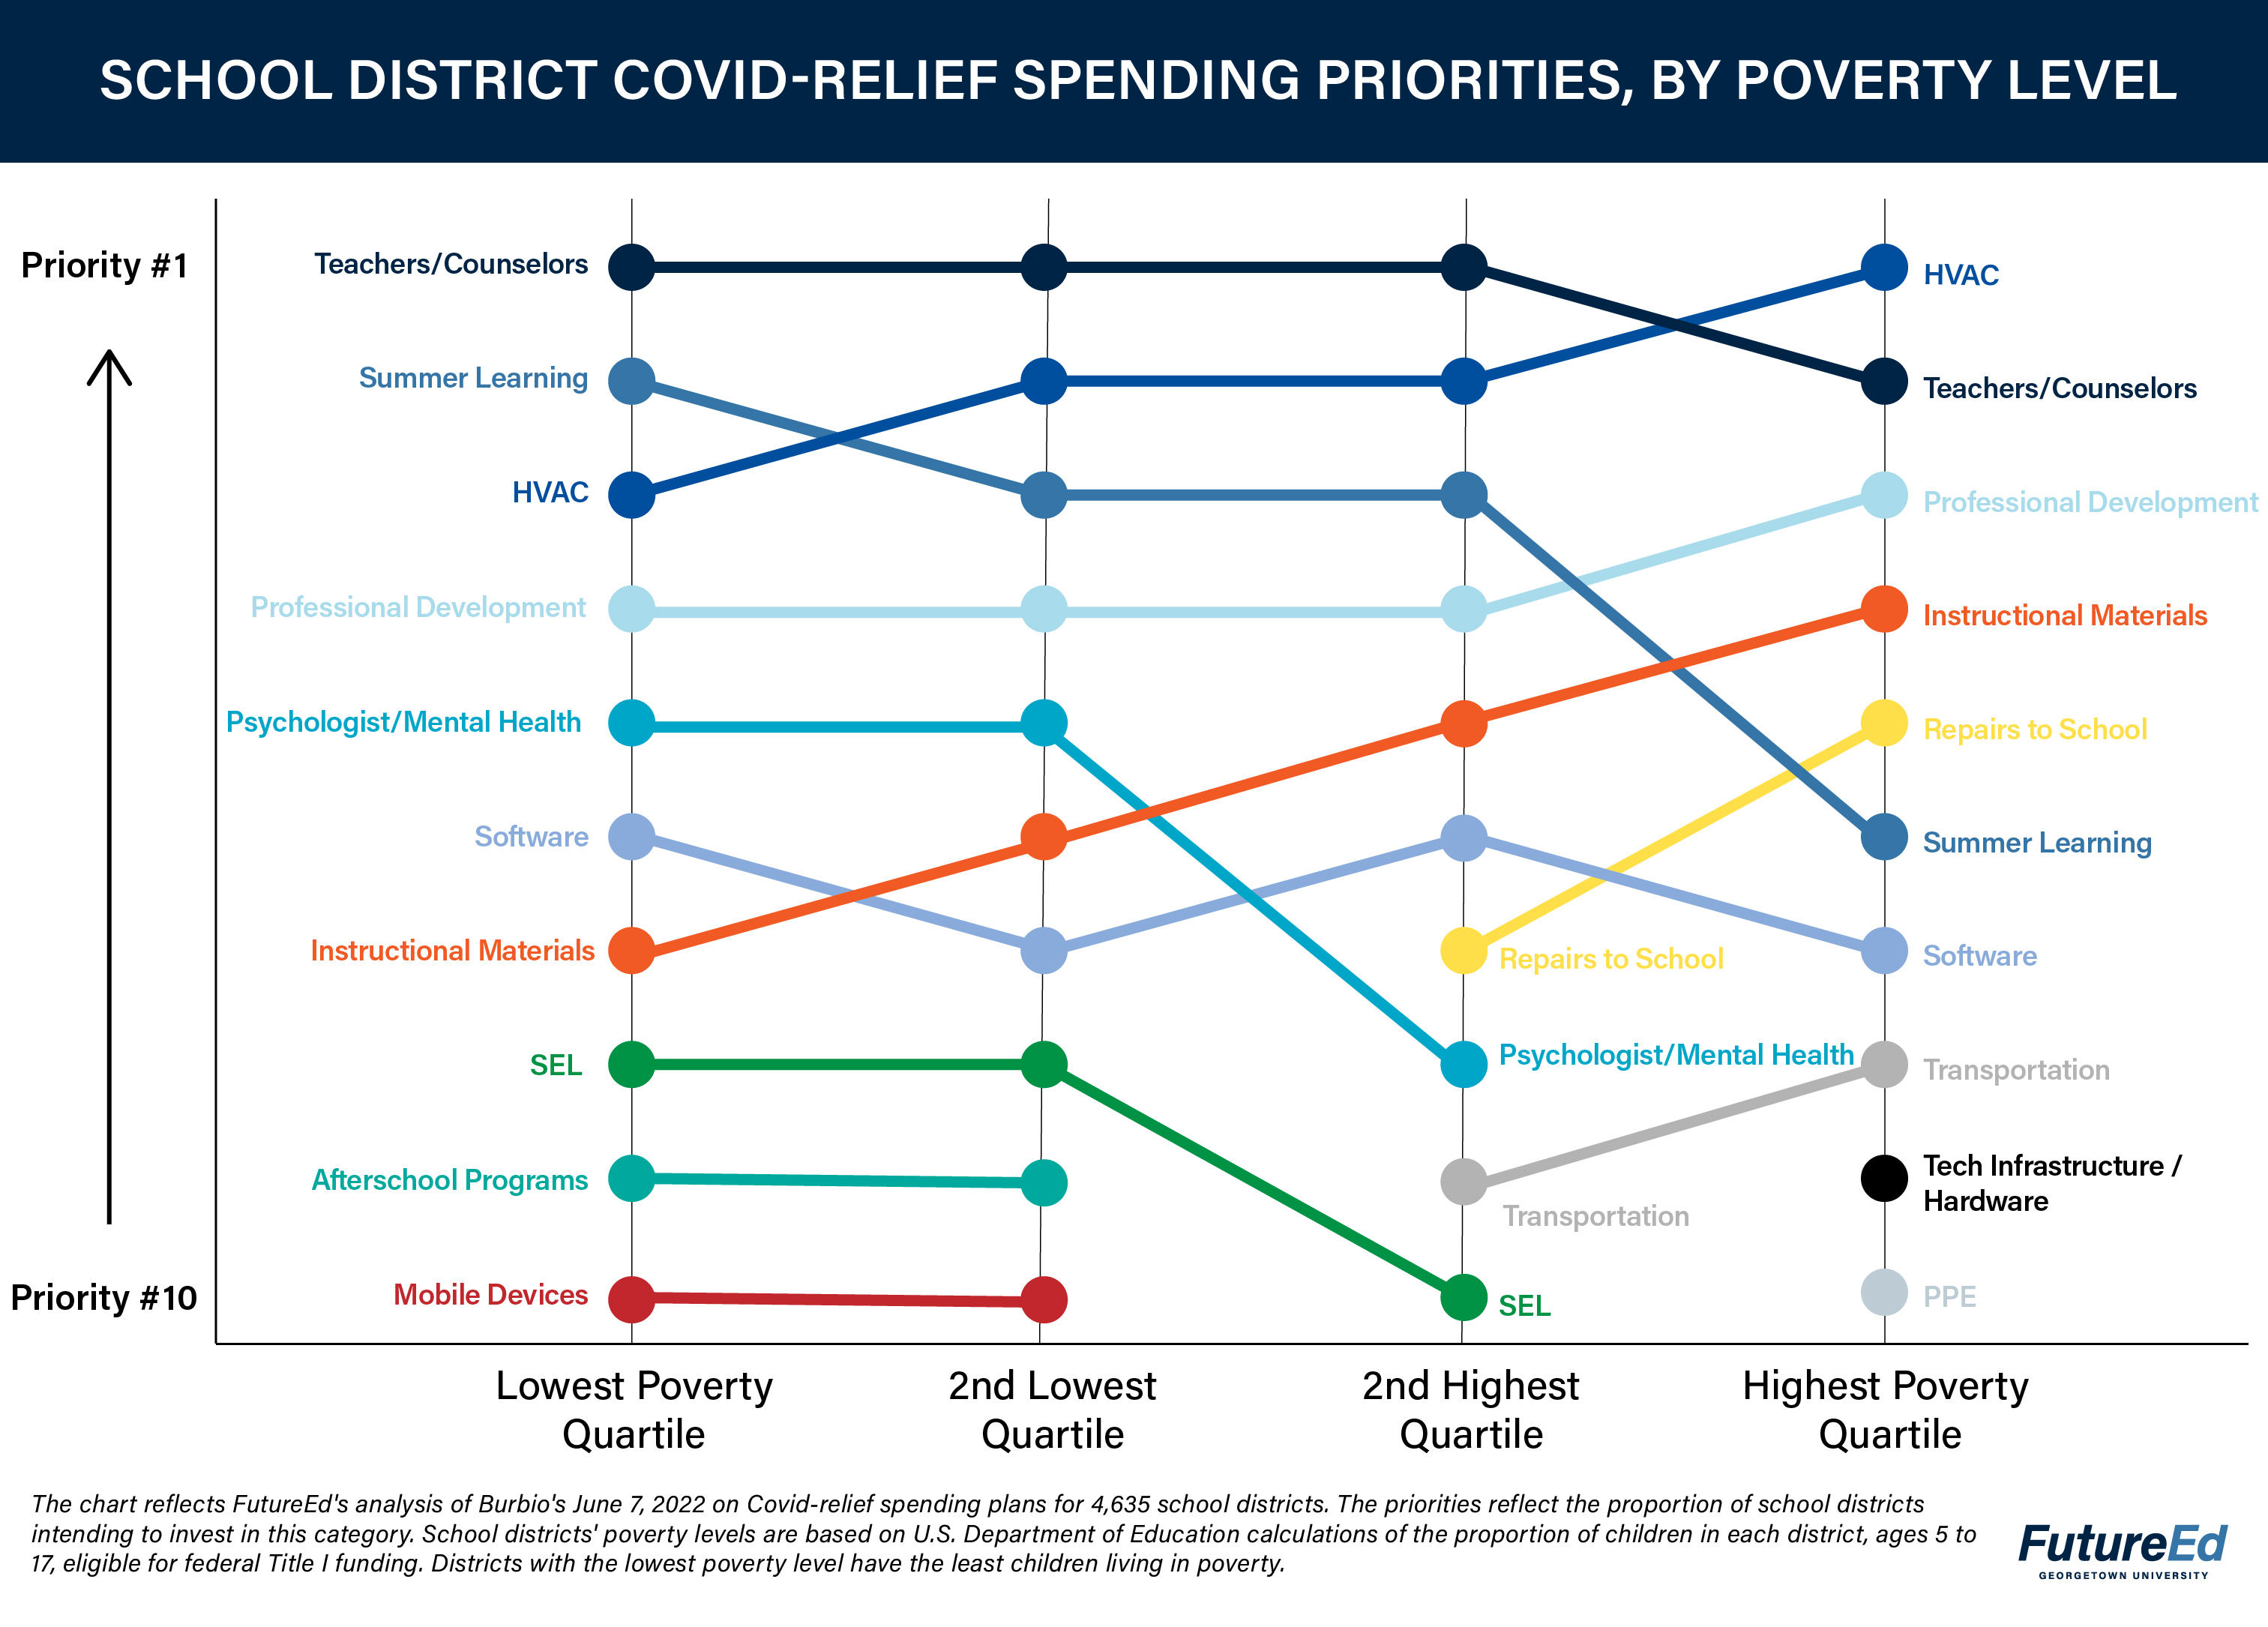 Chart: School District Covid-Relief Spending Priorities, By Poverty Level. Priority #1 to priority #10. Lowest Poverty Quartile: Teachers/Counselors, Summer Learning, HVAC, Professional Development, Psychologists/Mental health professionals, Software, Instructional materials, SEL, Afterschool programs, mobile devices. 2nd Lowest Quartile: Teachers/counselors, HVAC, Summer learning, professional development, psychologists/mental health professionals, instructional materials, software, SEL, afterschool programs, mobile devices. 2nd highest quartile: teachers/counselors, HVAC, summer learning, professional development, instructional materials, software, repairs to school, psychologists/mental health professionals, transportation, SEL. Highest poverty quartile: HVAC, teachers/counselors, professional development, instructional materials, repairs to school, summer learning, software, transportation, tech infrastructure/hardware, PPE. (The chart reflects FutureEd's analysis of Burbio's June 7, 2022, data on Covid-relief spending plans for 4,635 school districts. The priorities reflect the proportion of school districts intending to invest in this category. School districts' poverty levels are based on U.S. Department of Education calculations of the proportion of children in each district, ages 5 to 17, eligible for federal Title I funding. Districts with the lowest poverty level have the least children living in poverty.)